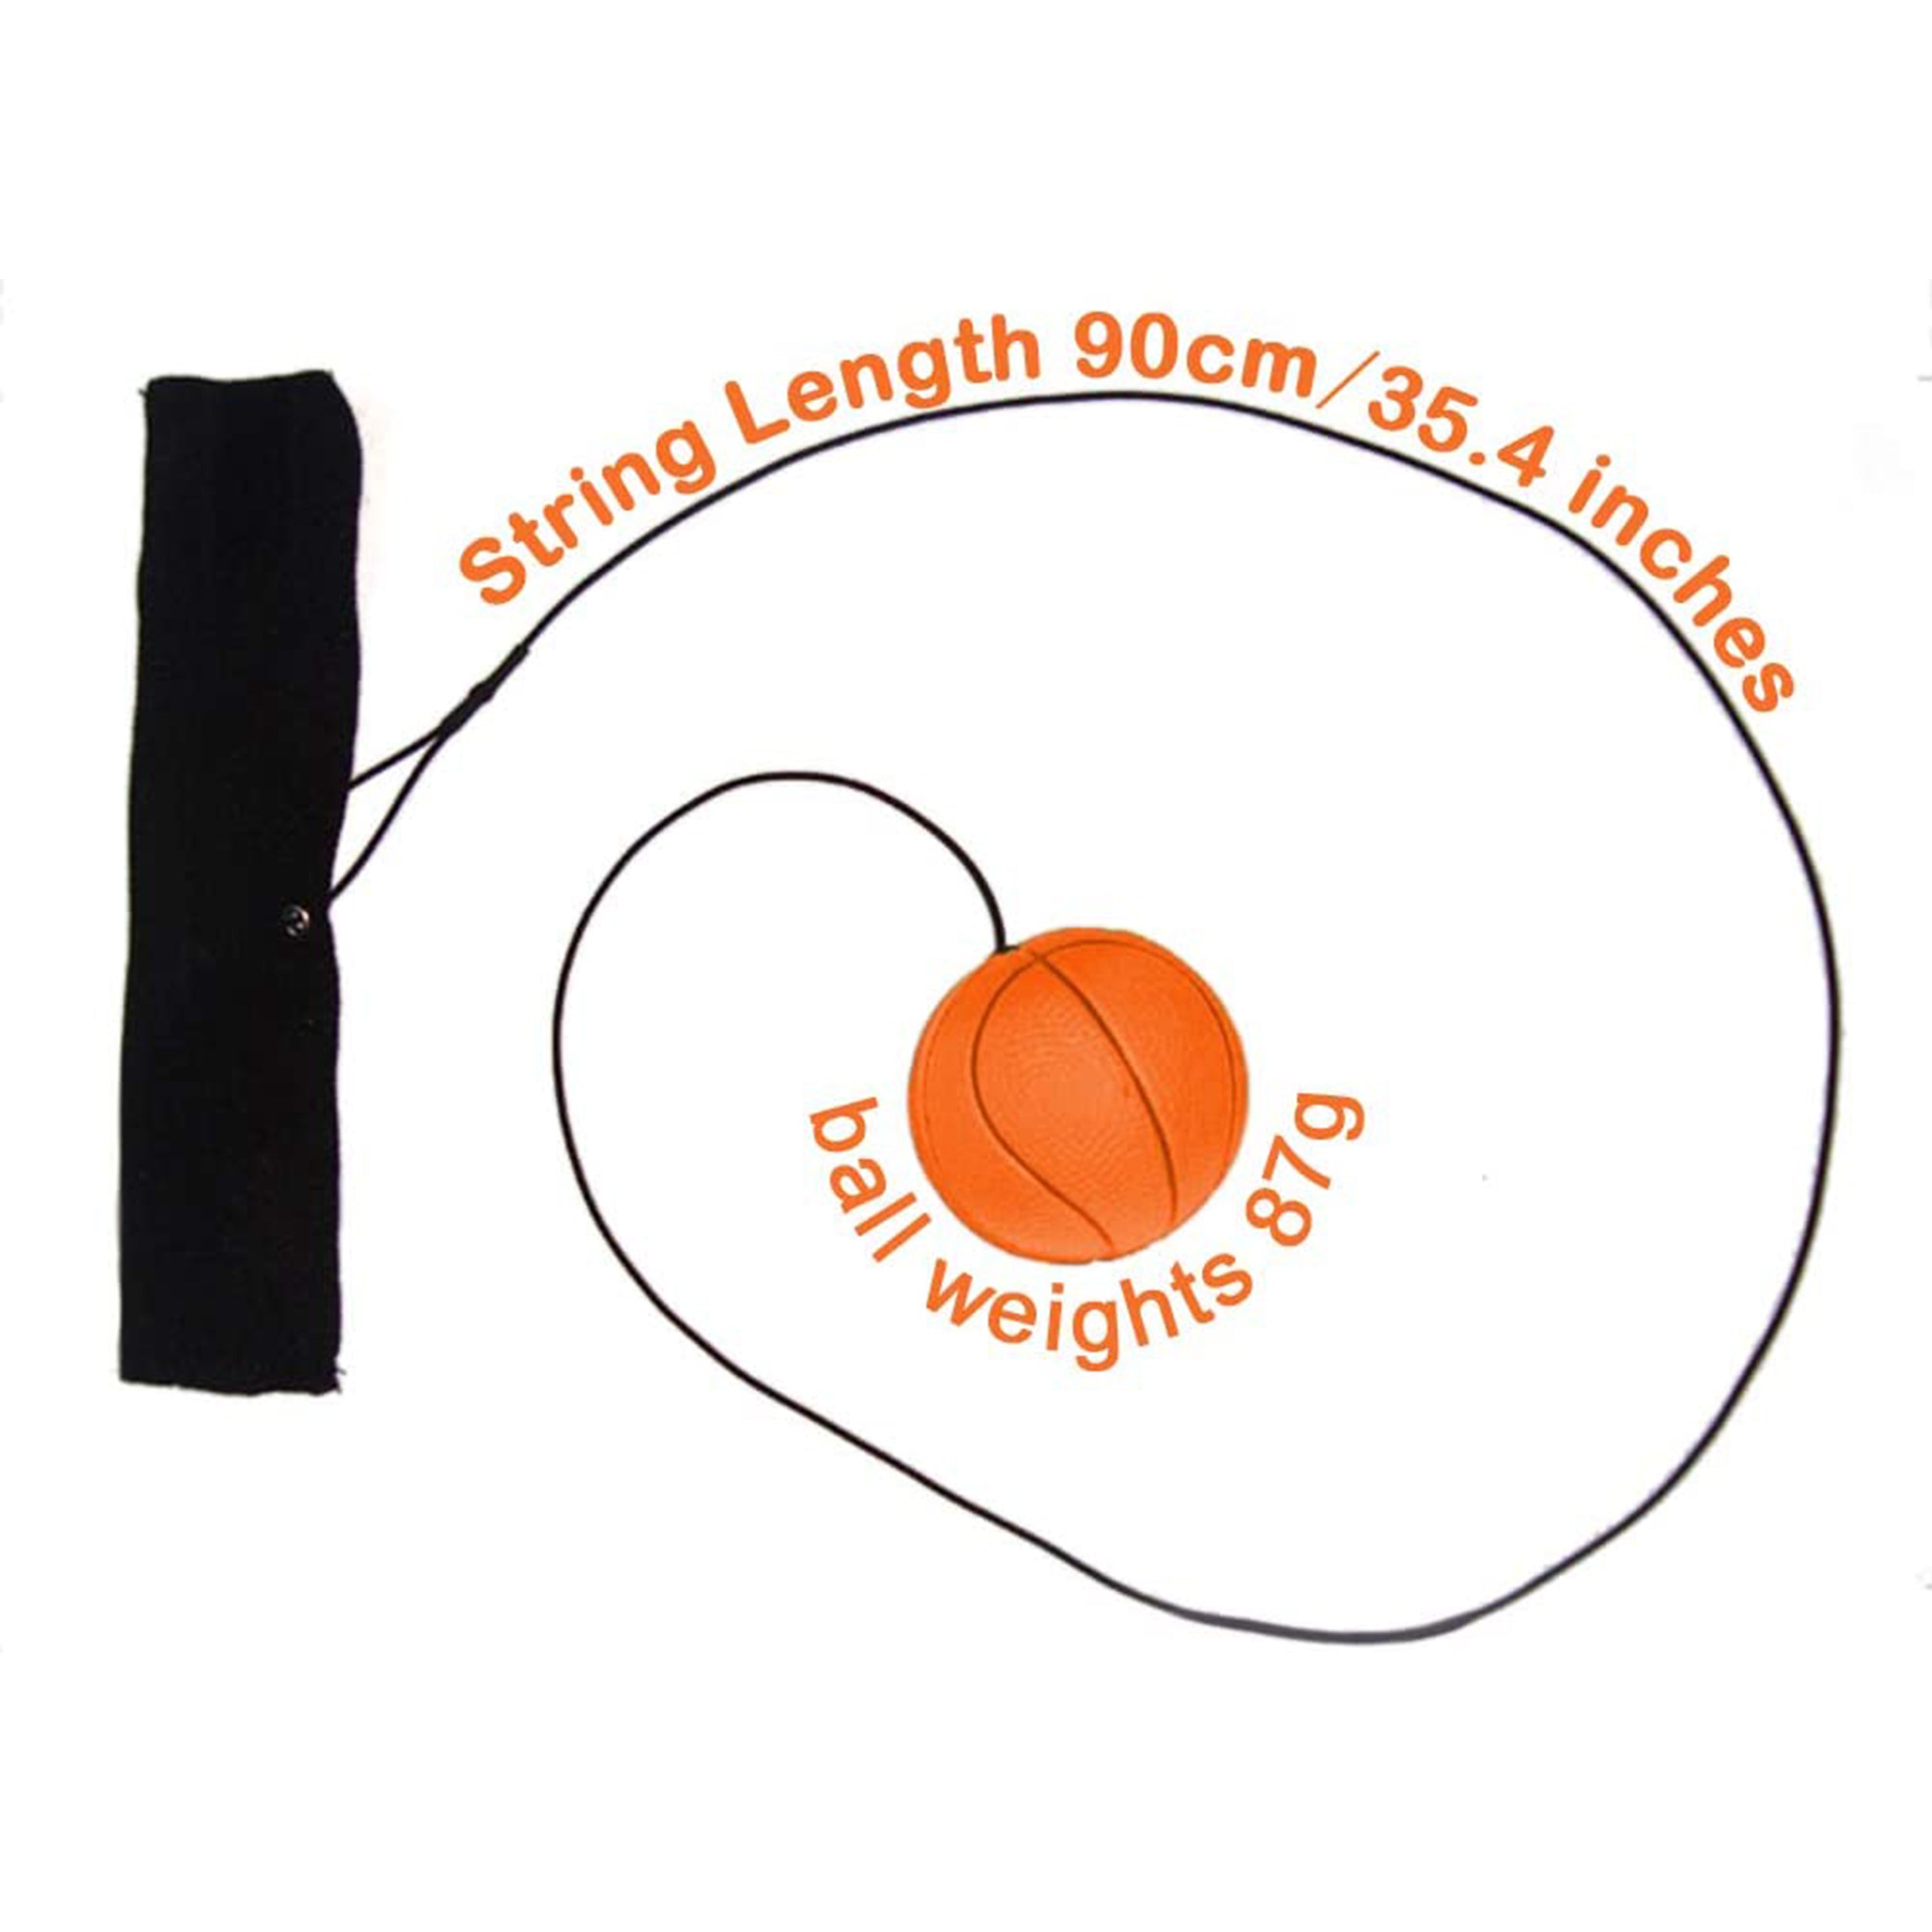 SpinTastic Wrist Ball - The Ultimate Wrist Strengthening Tool for Kids and Adults